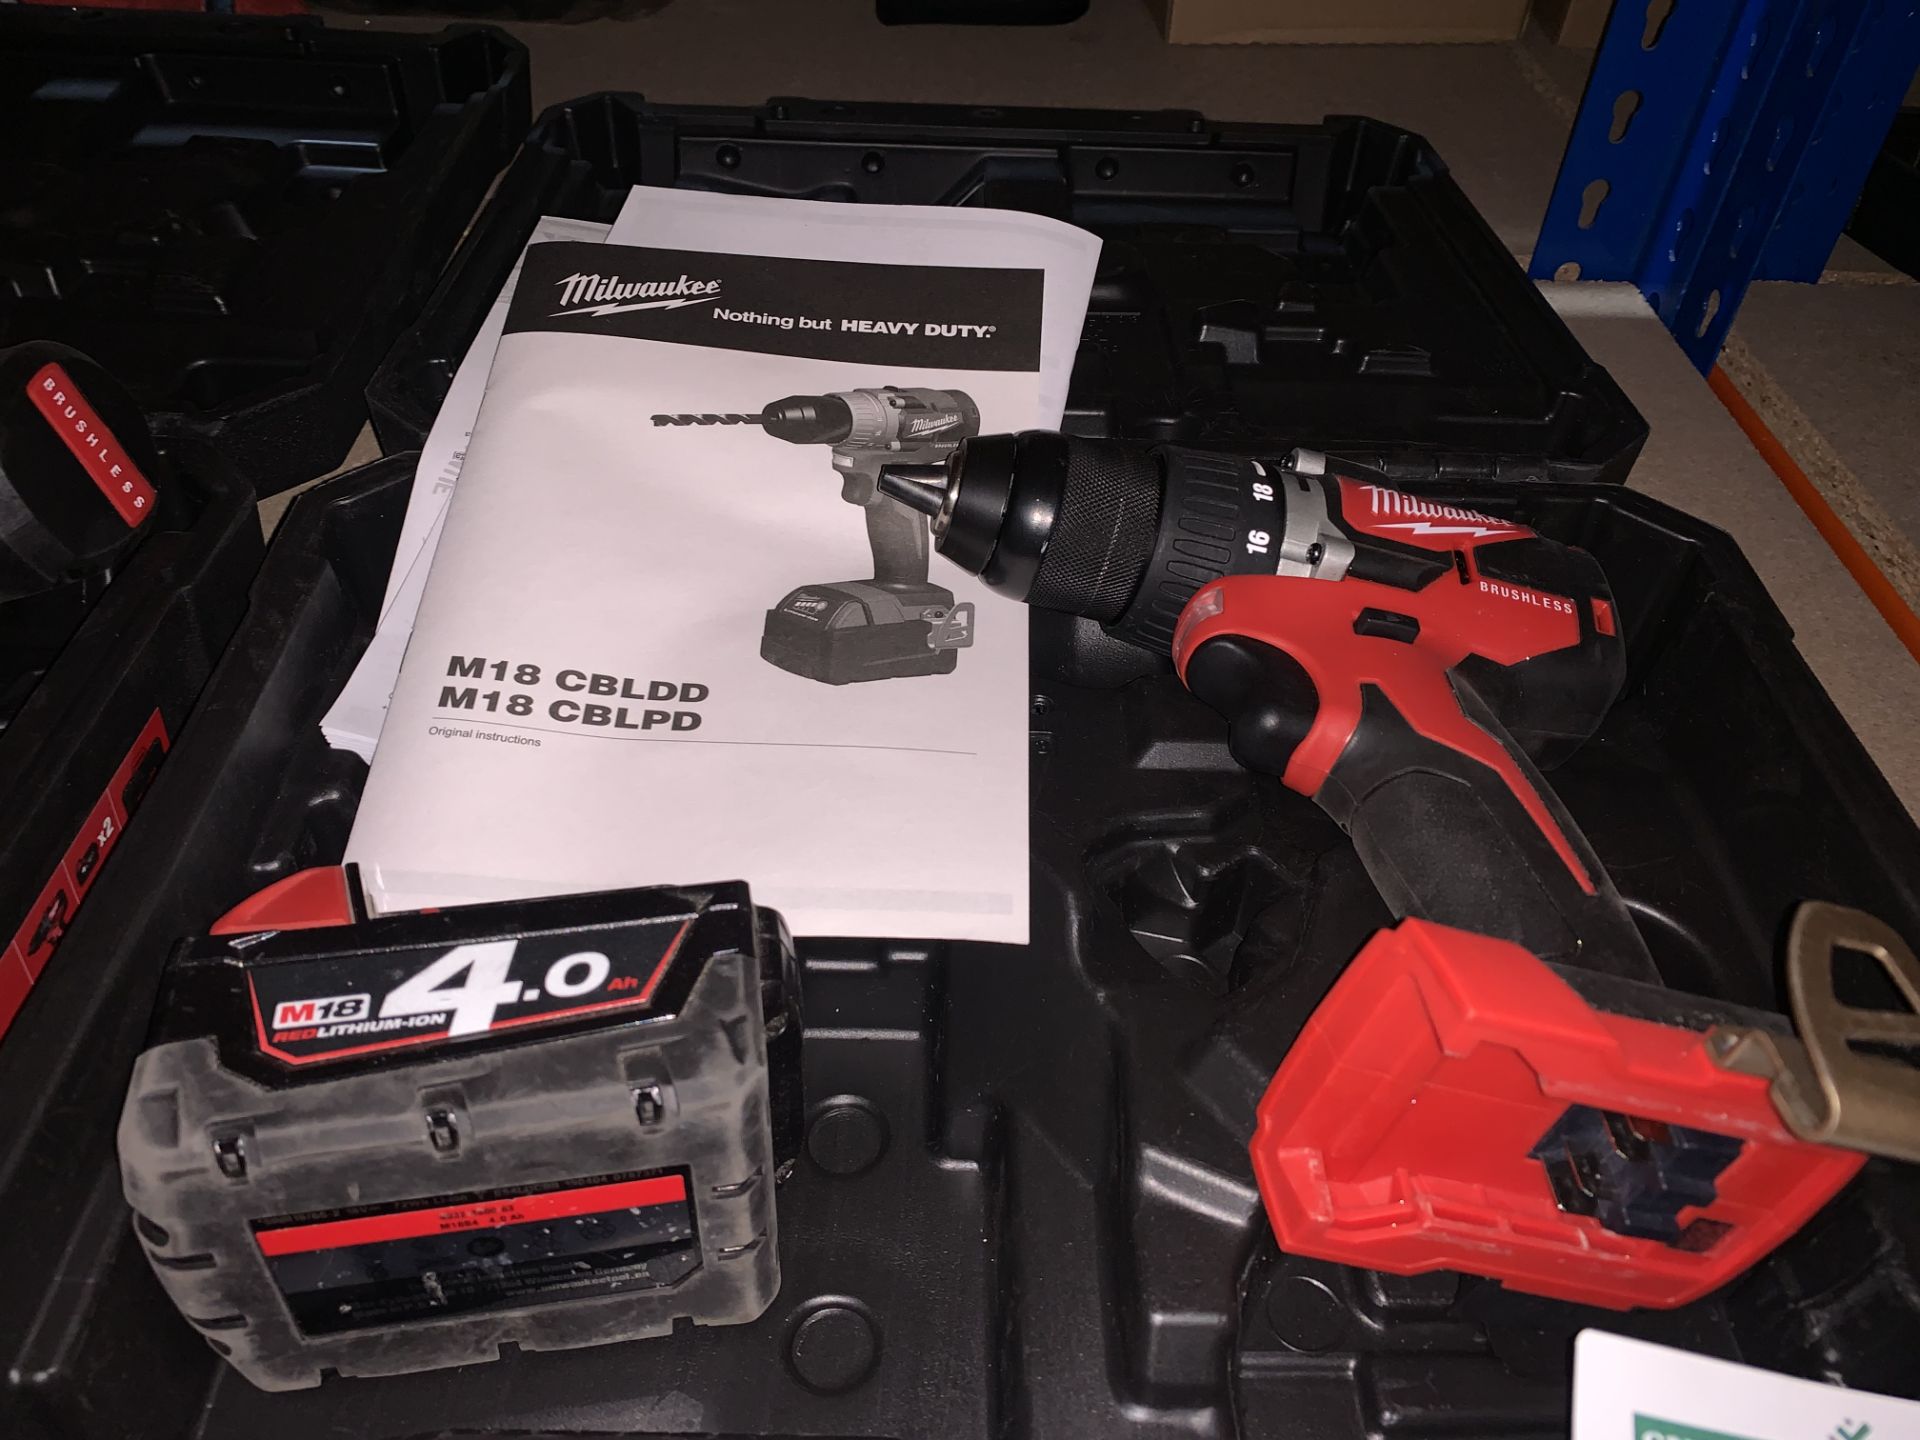 MILWAUKEE M18 CBLPD-402C 18V 4.0AH LI-ION REDLITHIUM BRUSHLESS CORDLESS COMBI DRILL. COMES WITH 1